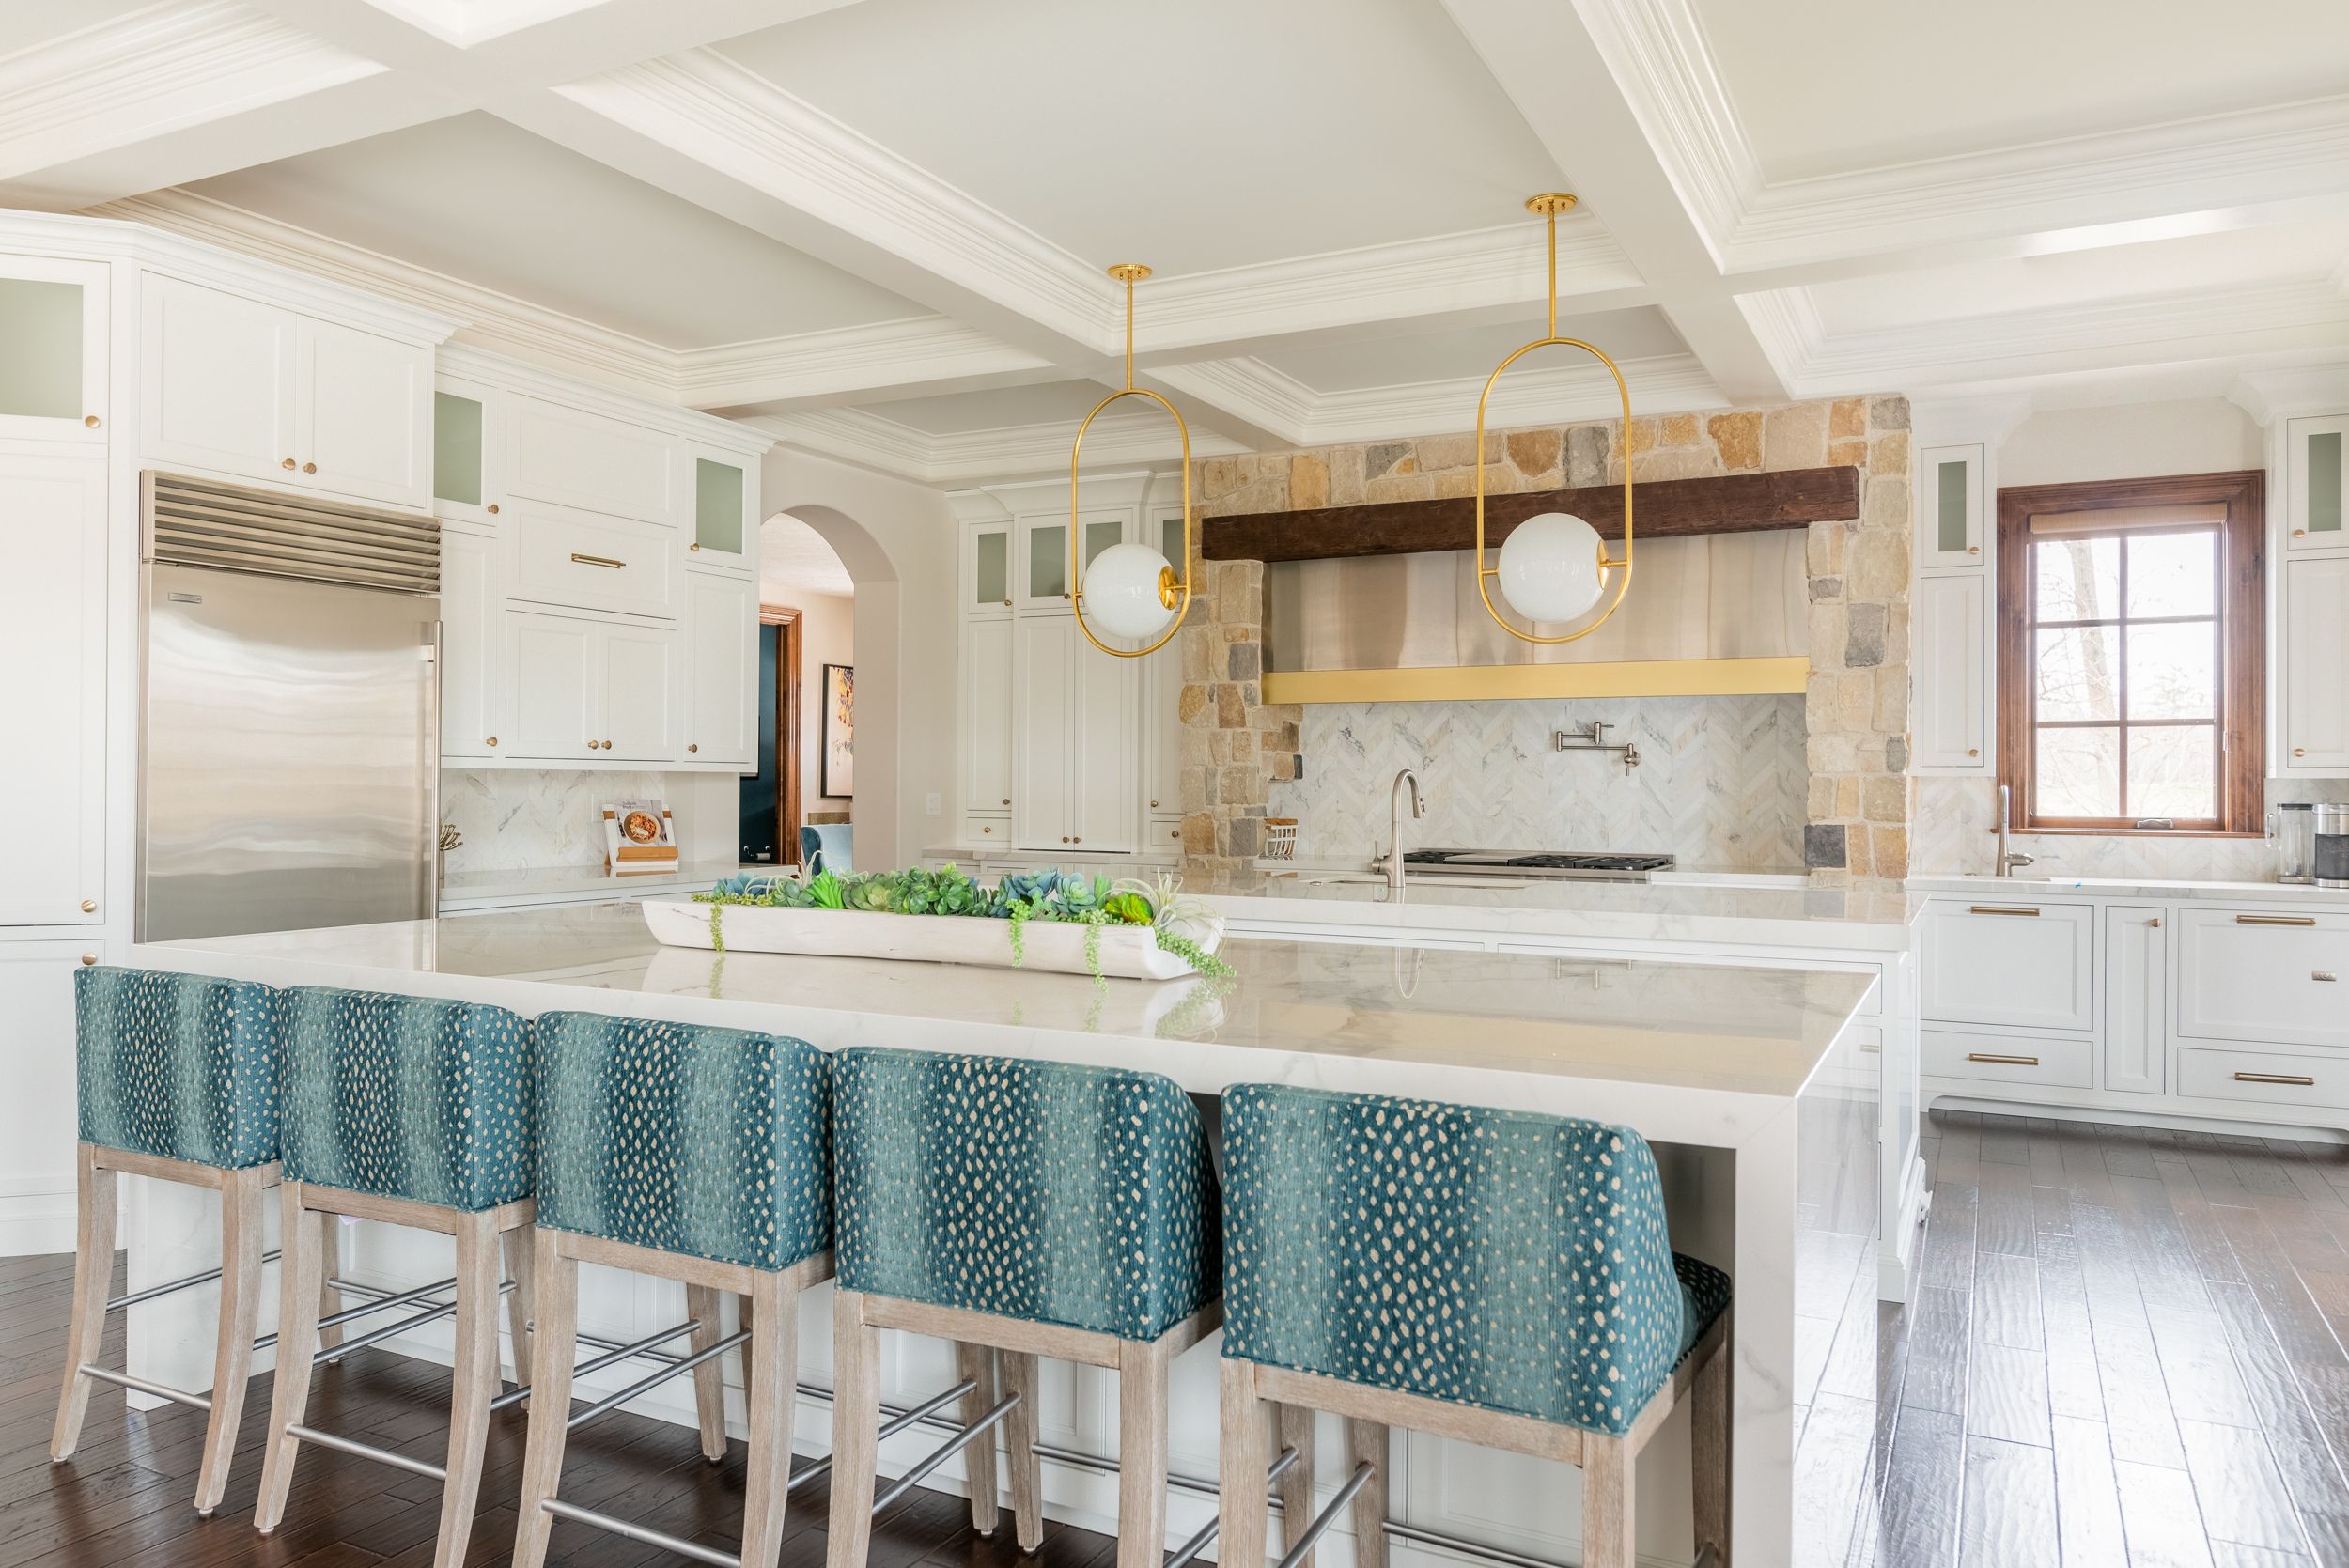 Rustic Transitional double island white kitchen